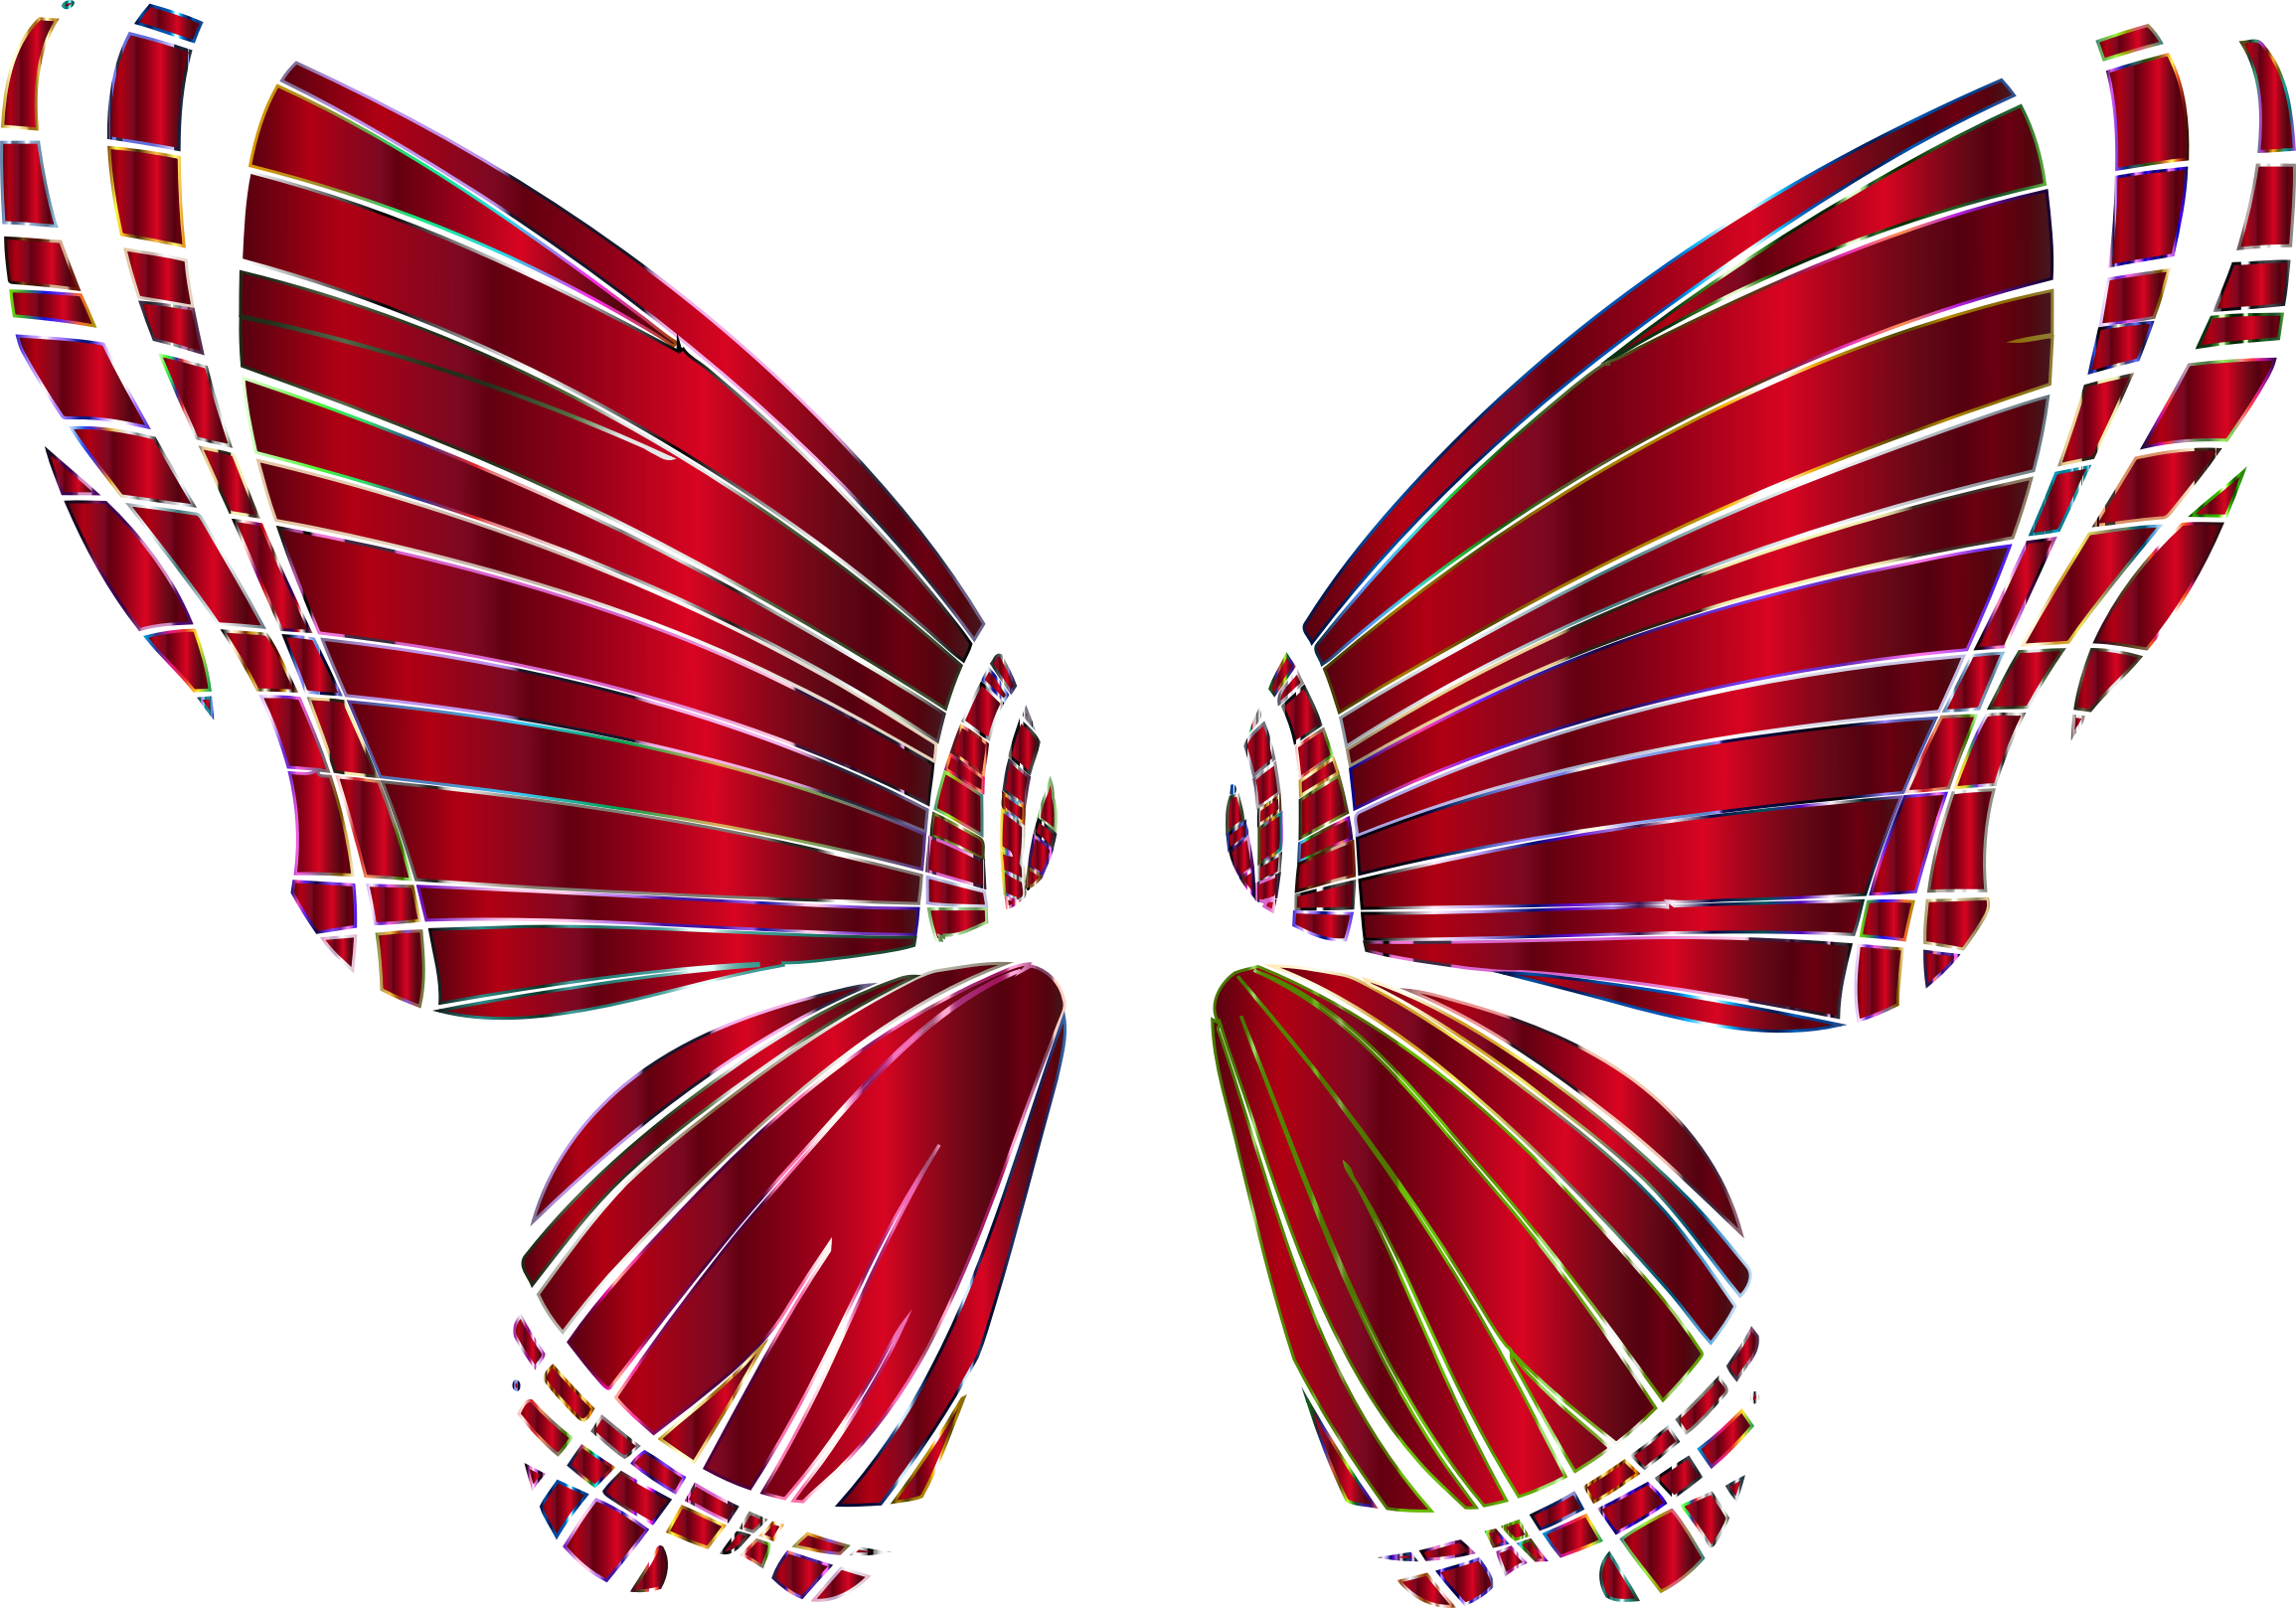 Butterfly Silhouette 10 14 No Background - Transparent Background Red Butterfly (2310x1618)